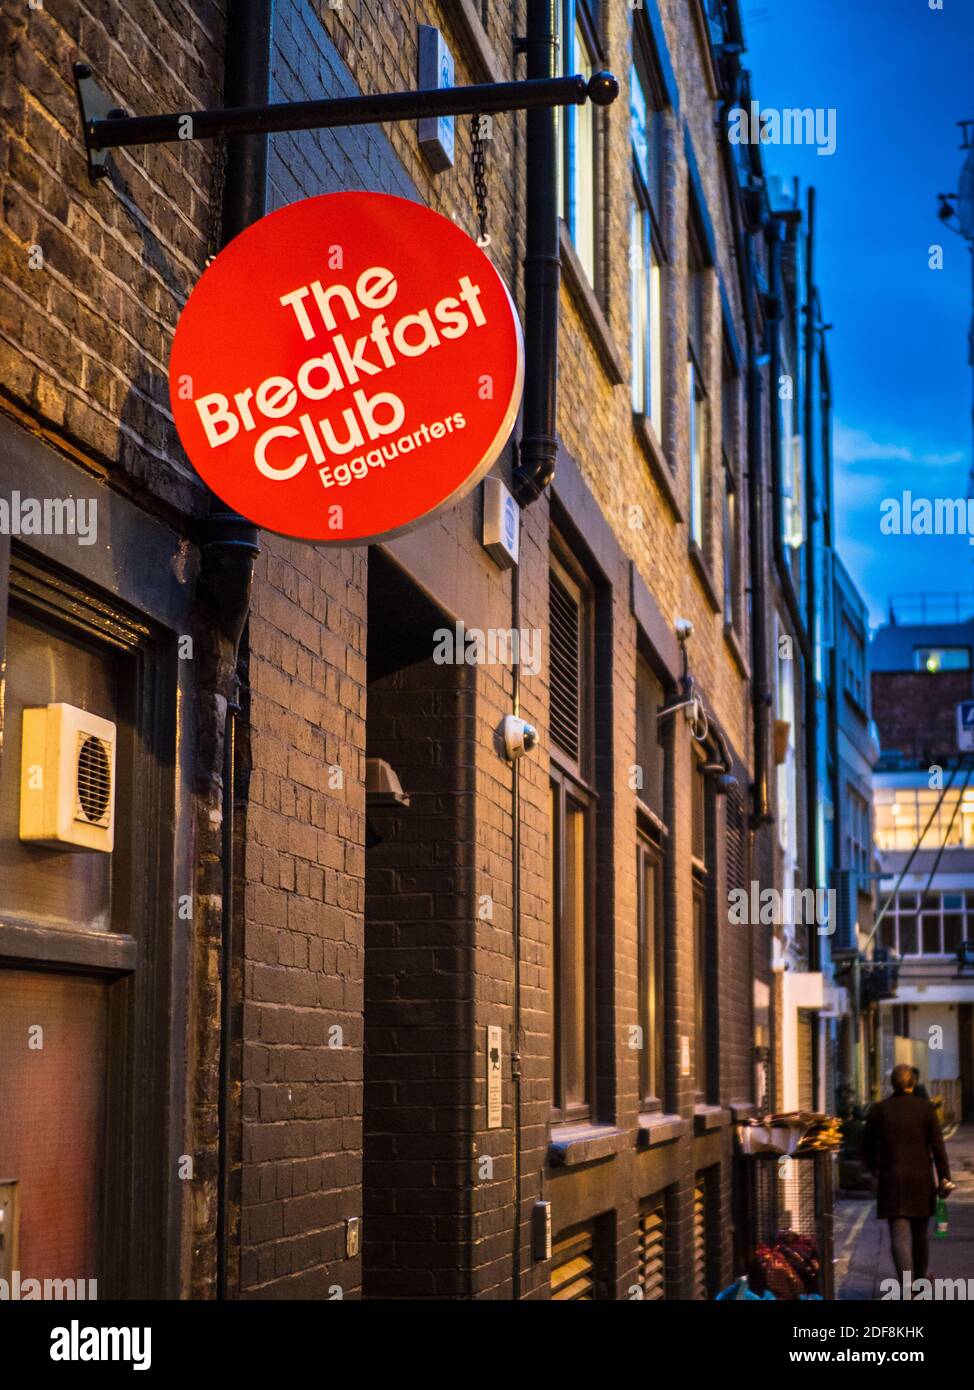 The Breakfast Club HQ or Eggquarters at 1 Wardour Mews Soho Central London - The Breakfast Club is a small chain founded in Soho in 2005. Stock Photo